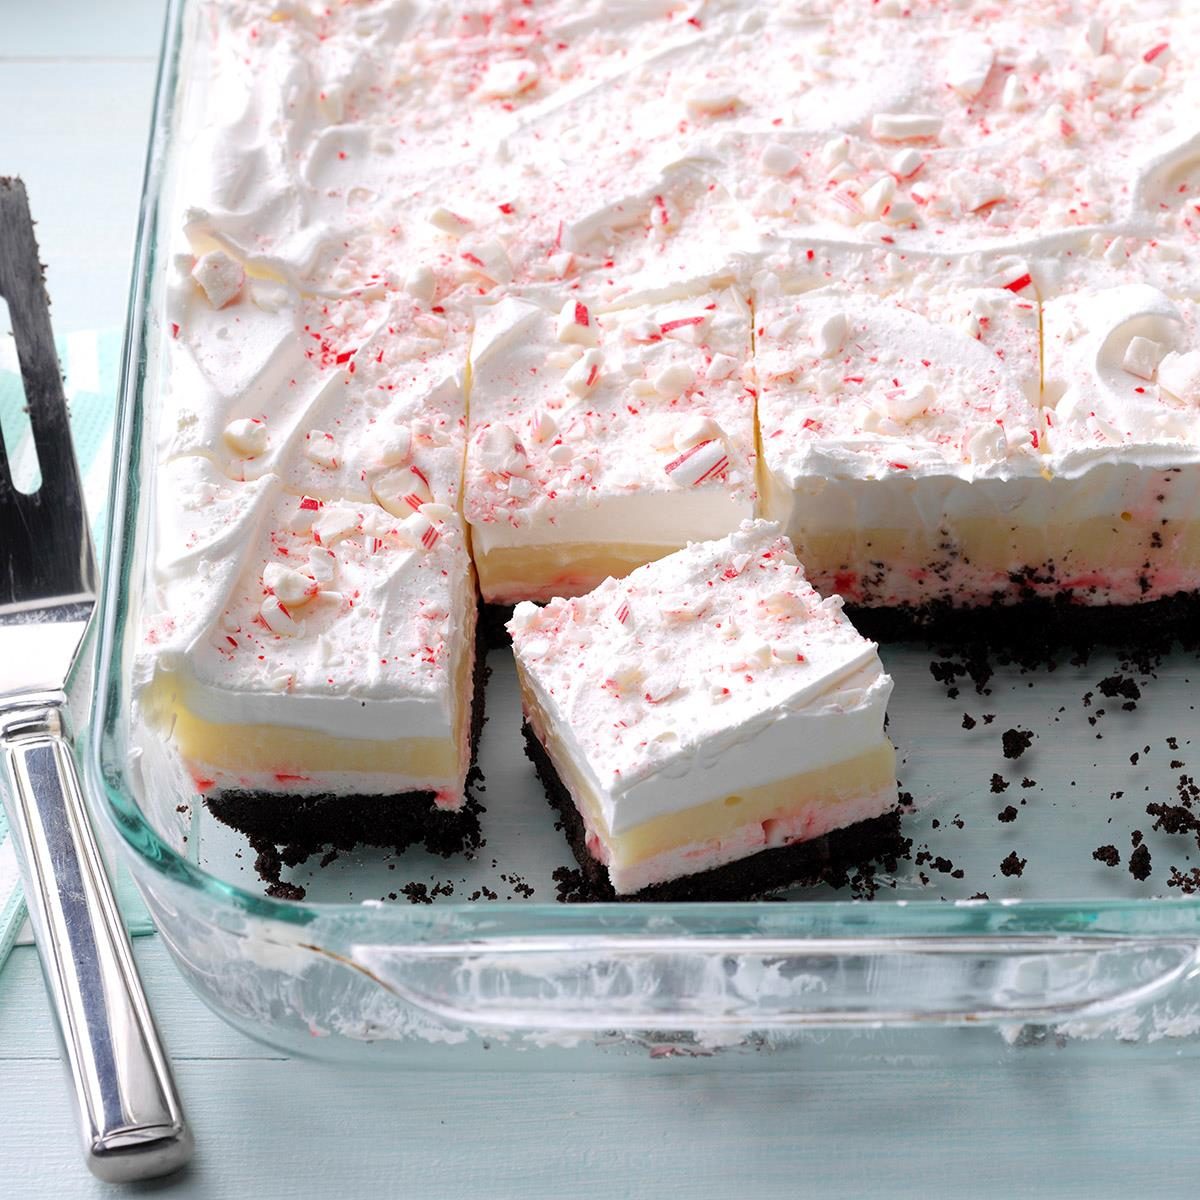 Layered Candy Cane Dessert Recipe How To Make It